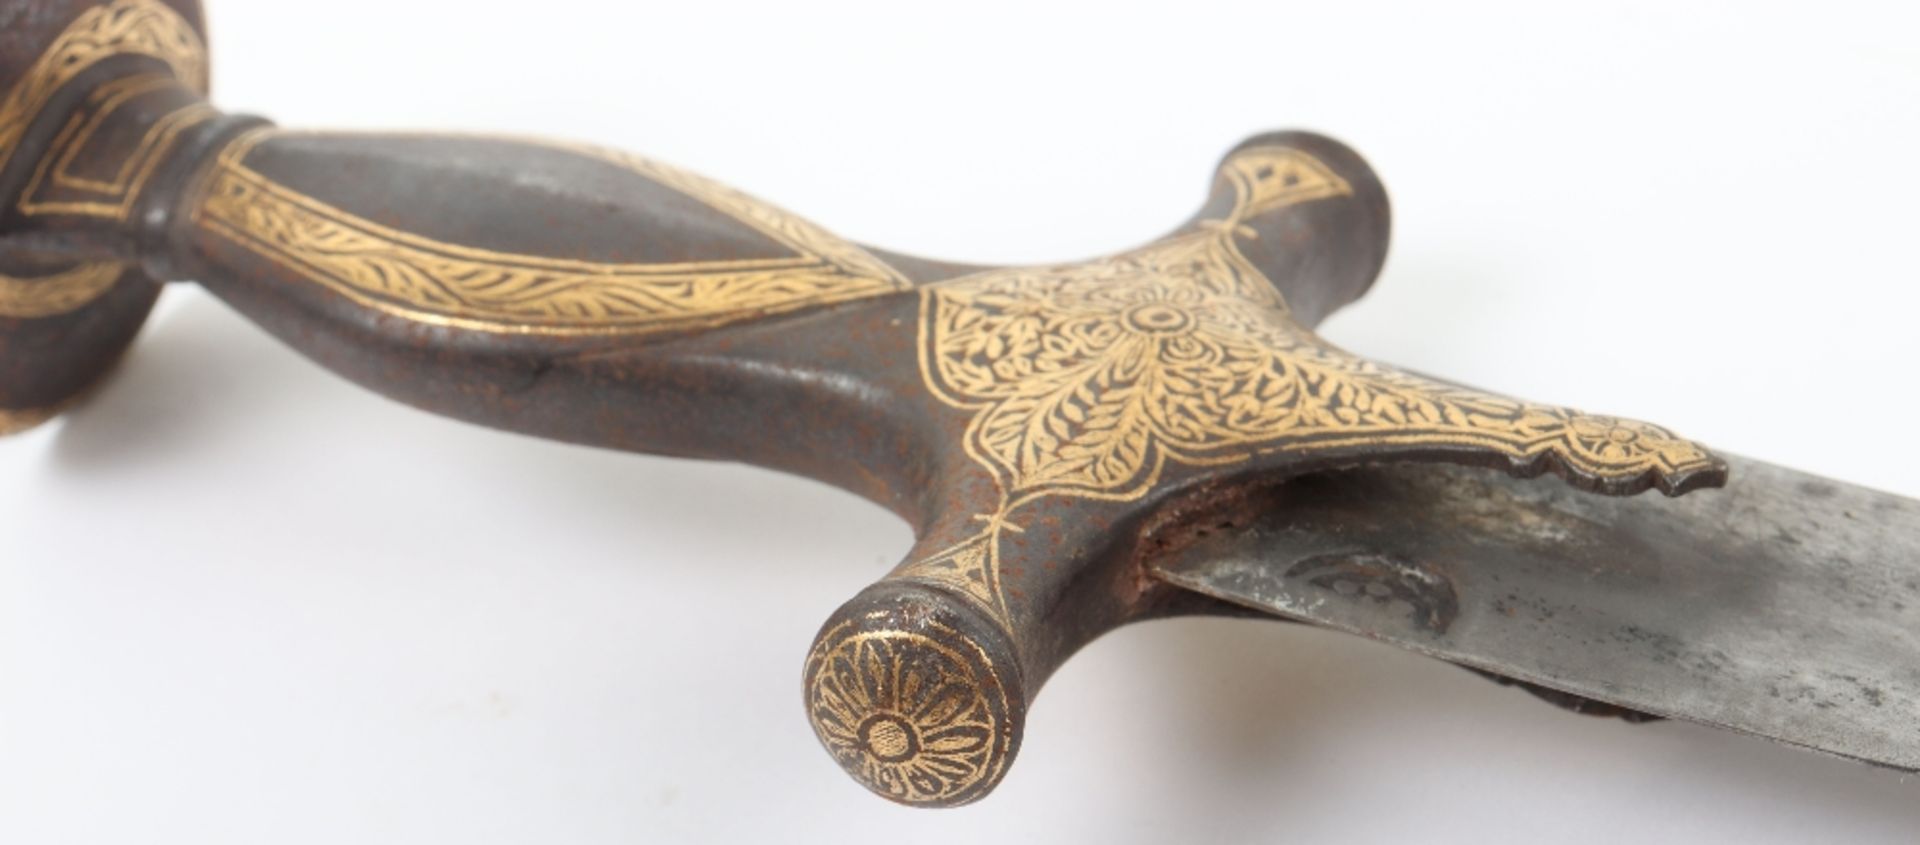 Decorative Indian Sword Tulwar Perhaps for a Youth - Image 5 of 13